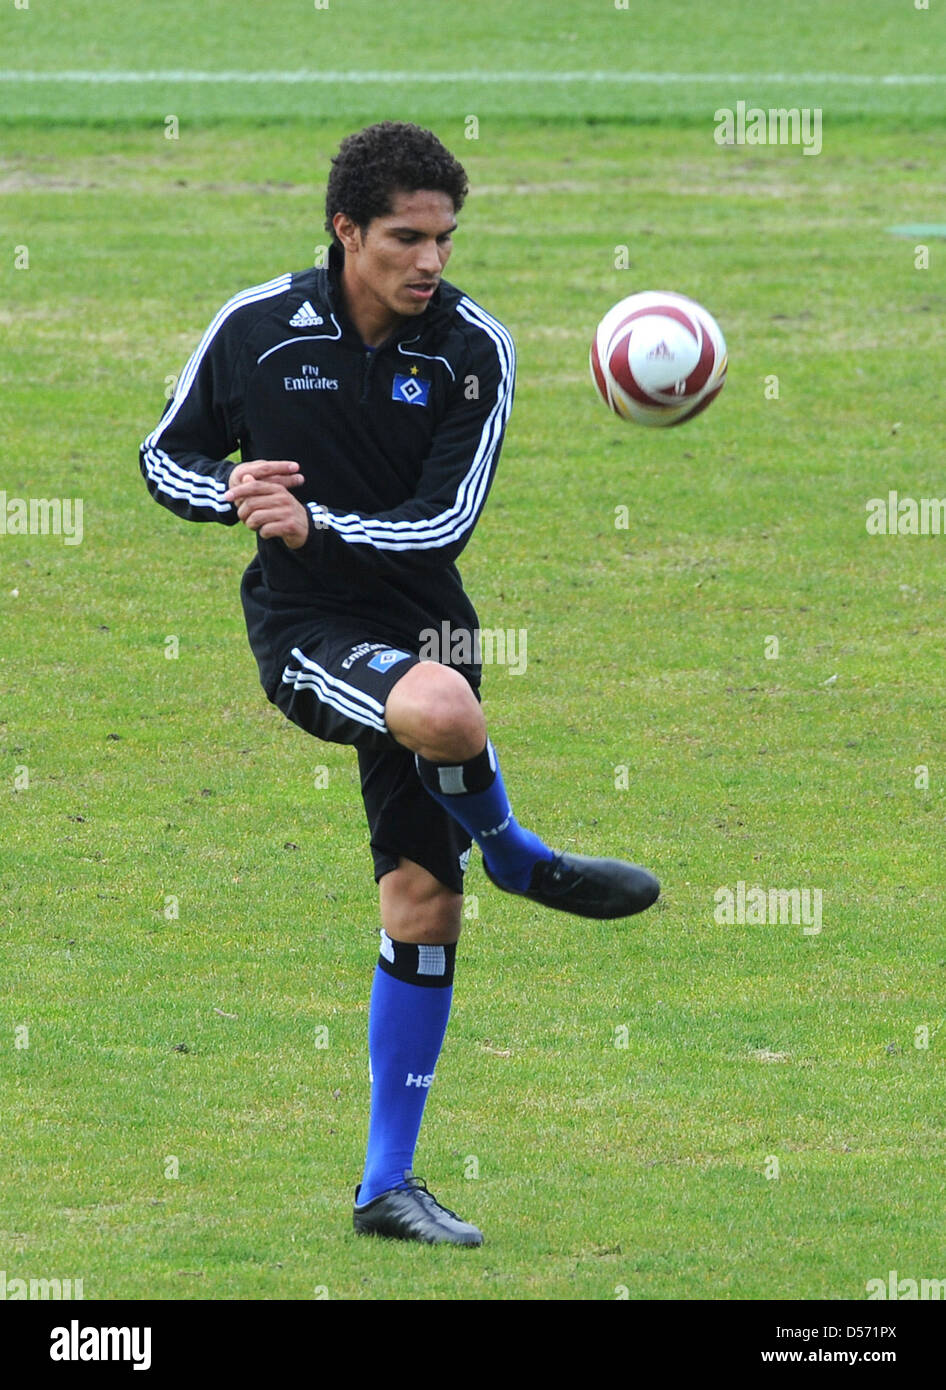 Hamburg's José Paolo Guerrero pictured during a training session of German Bundesliga soccer club SV Hamburg in Hamburg, Germany, 06 April 2010. After the goalless draw in the Bundesliga match against Hanover 96 on 04 April 2010, Guerrero threw a drinking bottle in a fan's face who had provoked him before. Guerrero could be suspended by the German Football Association DFB. Photo: M Stock Photo